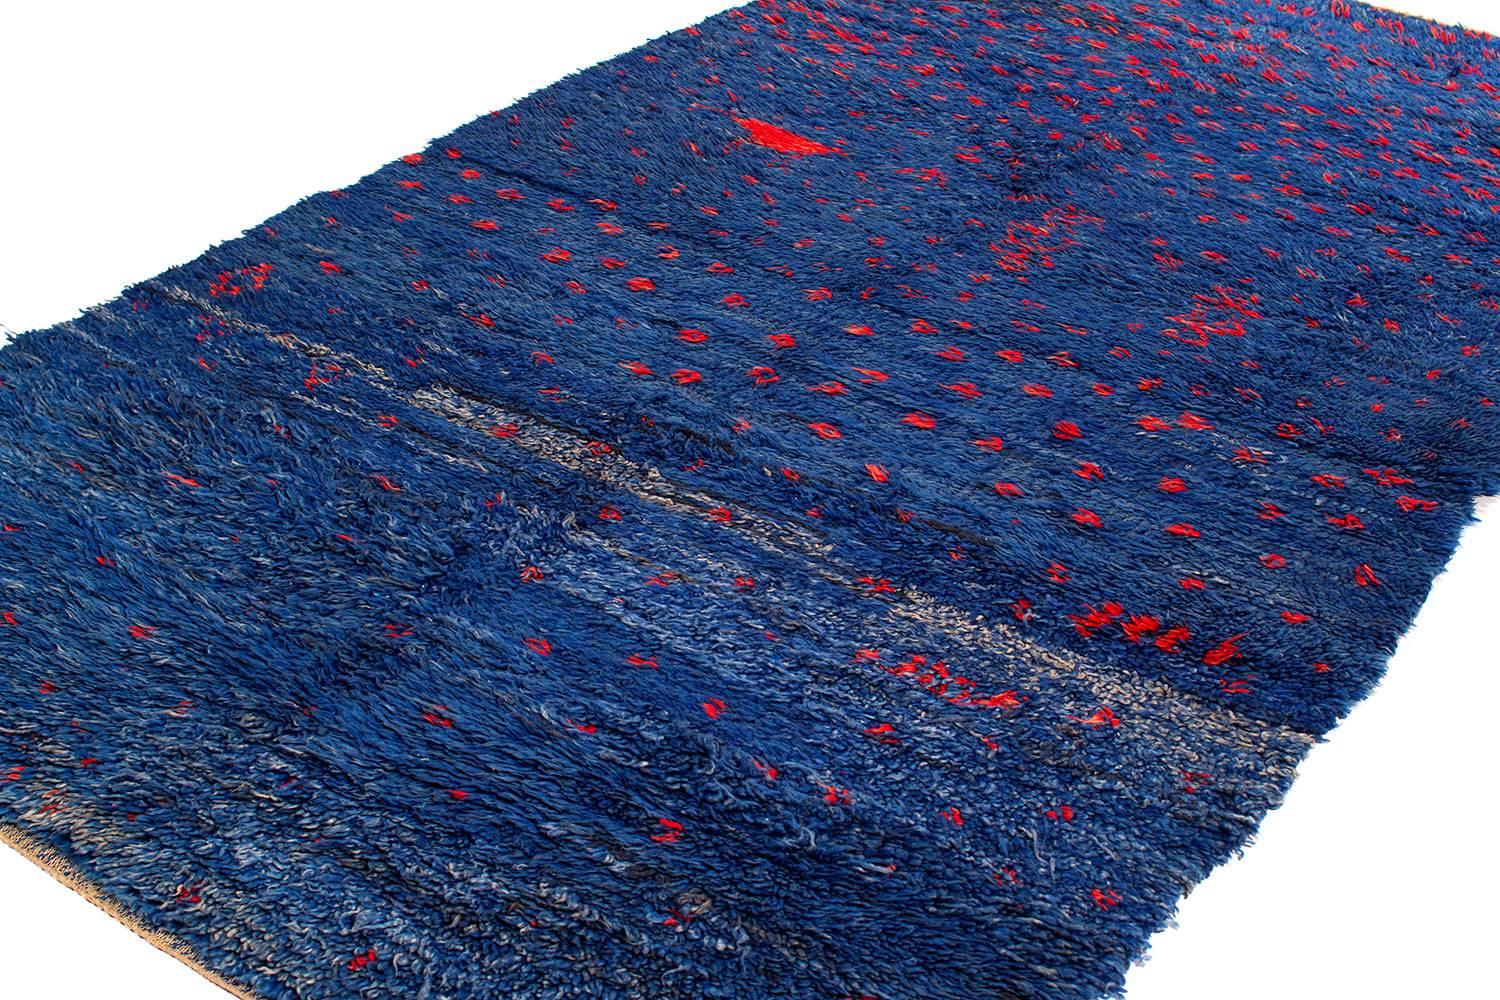 This piece is highly unusual and rare. This vintage Moroccan rug shows a chicken motif and red dots throughout. There is spectacular indigo color with slight abrash across the field. This piece is truly one-of-a-kind!